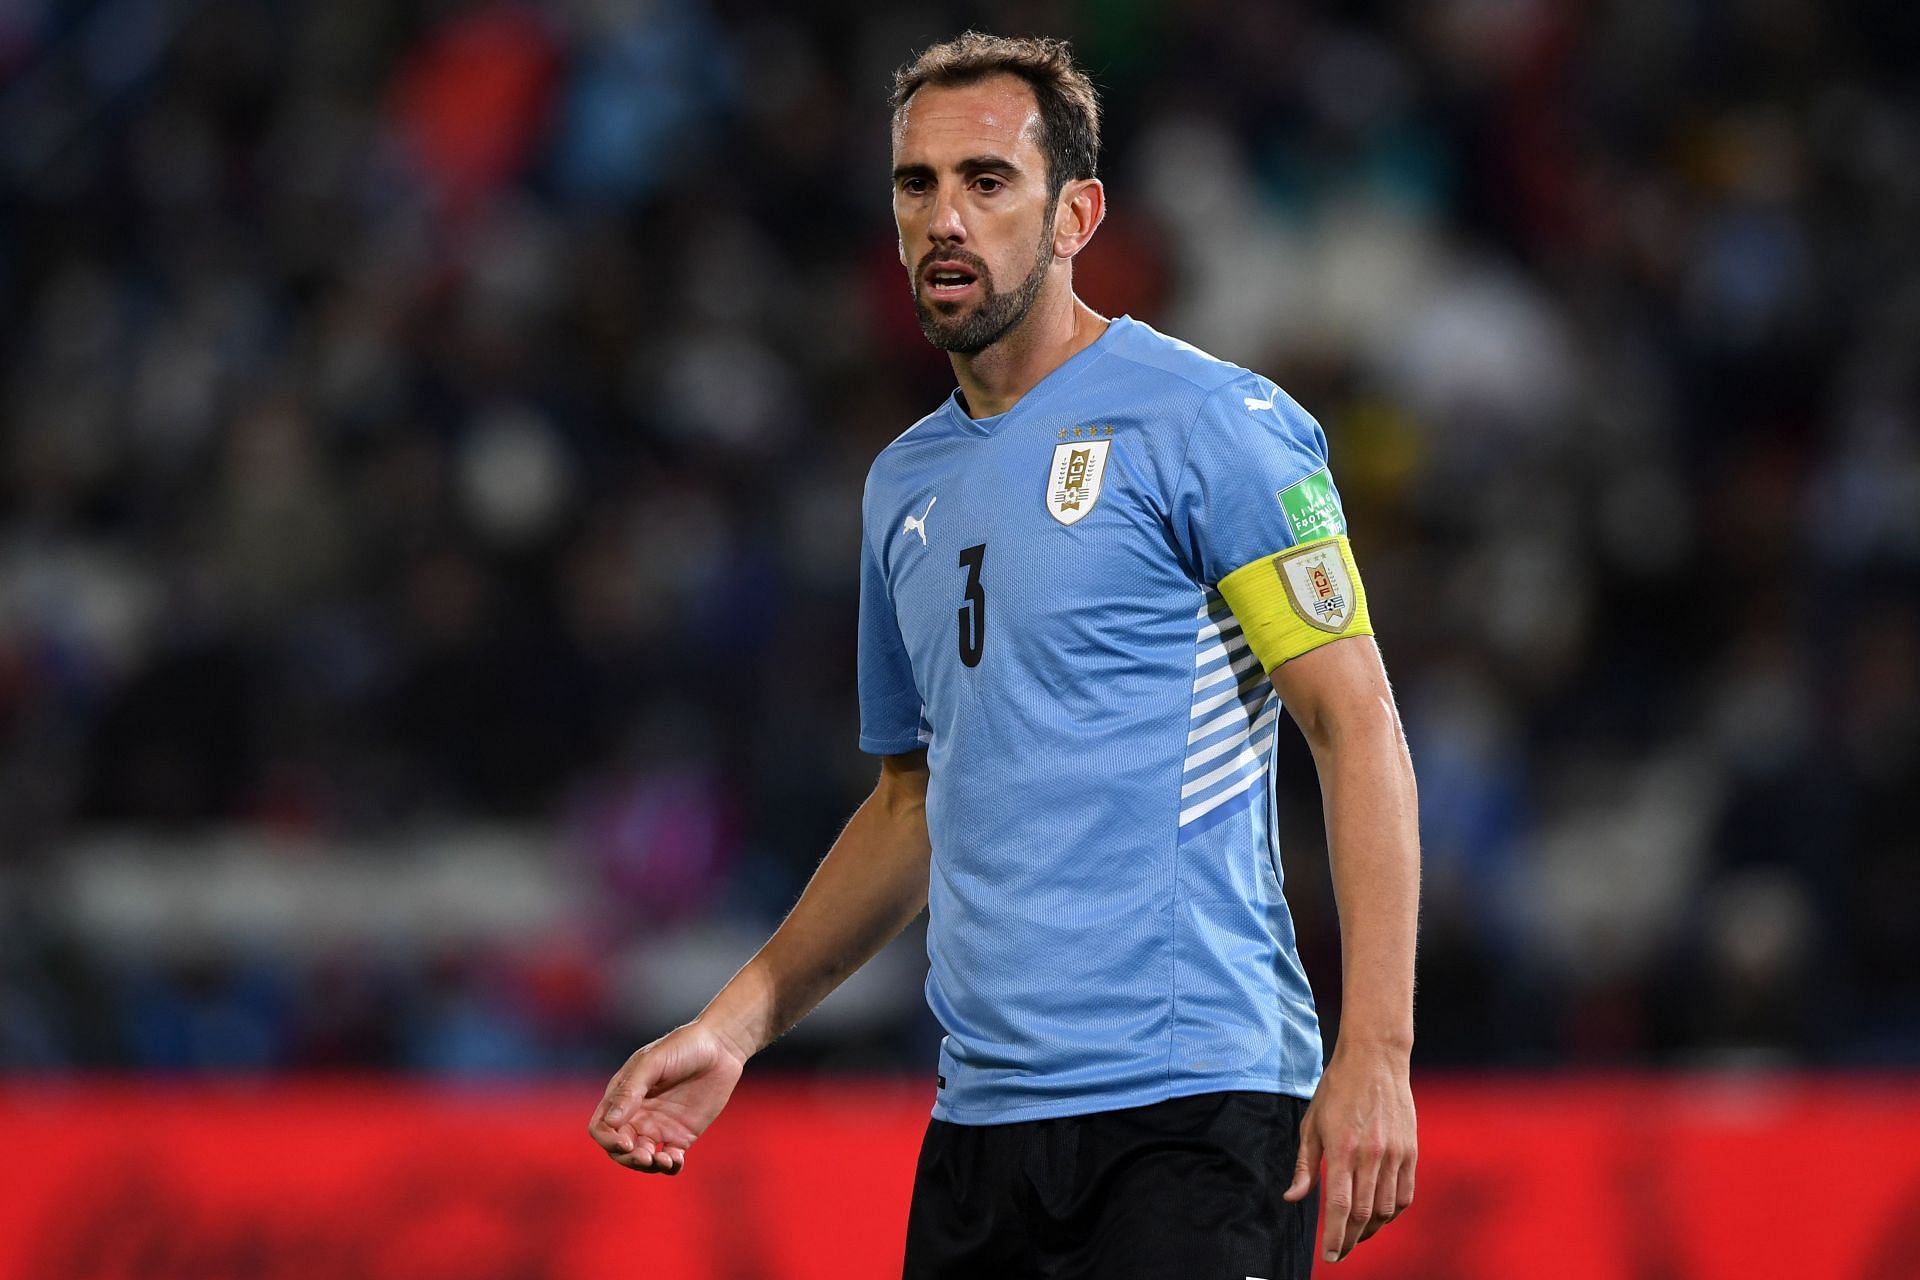 Diego Godin is one of the best traditional center-backs in the modern game